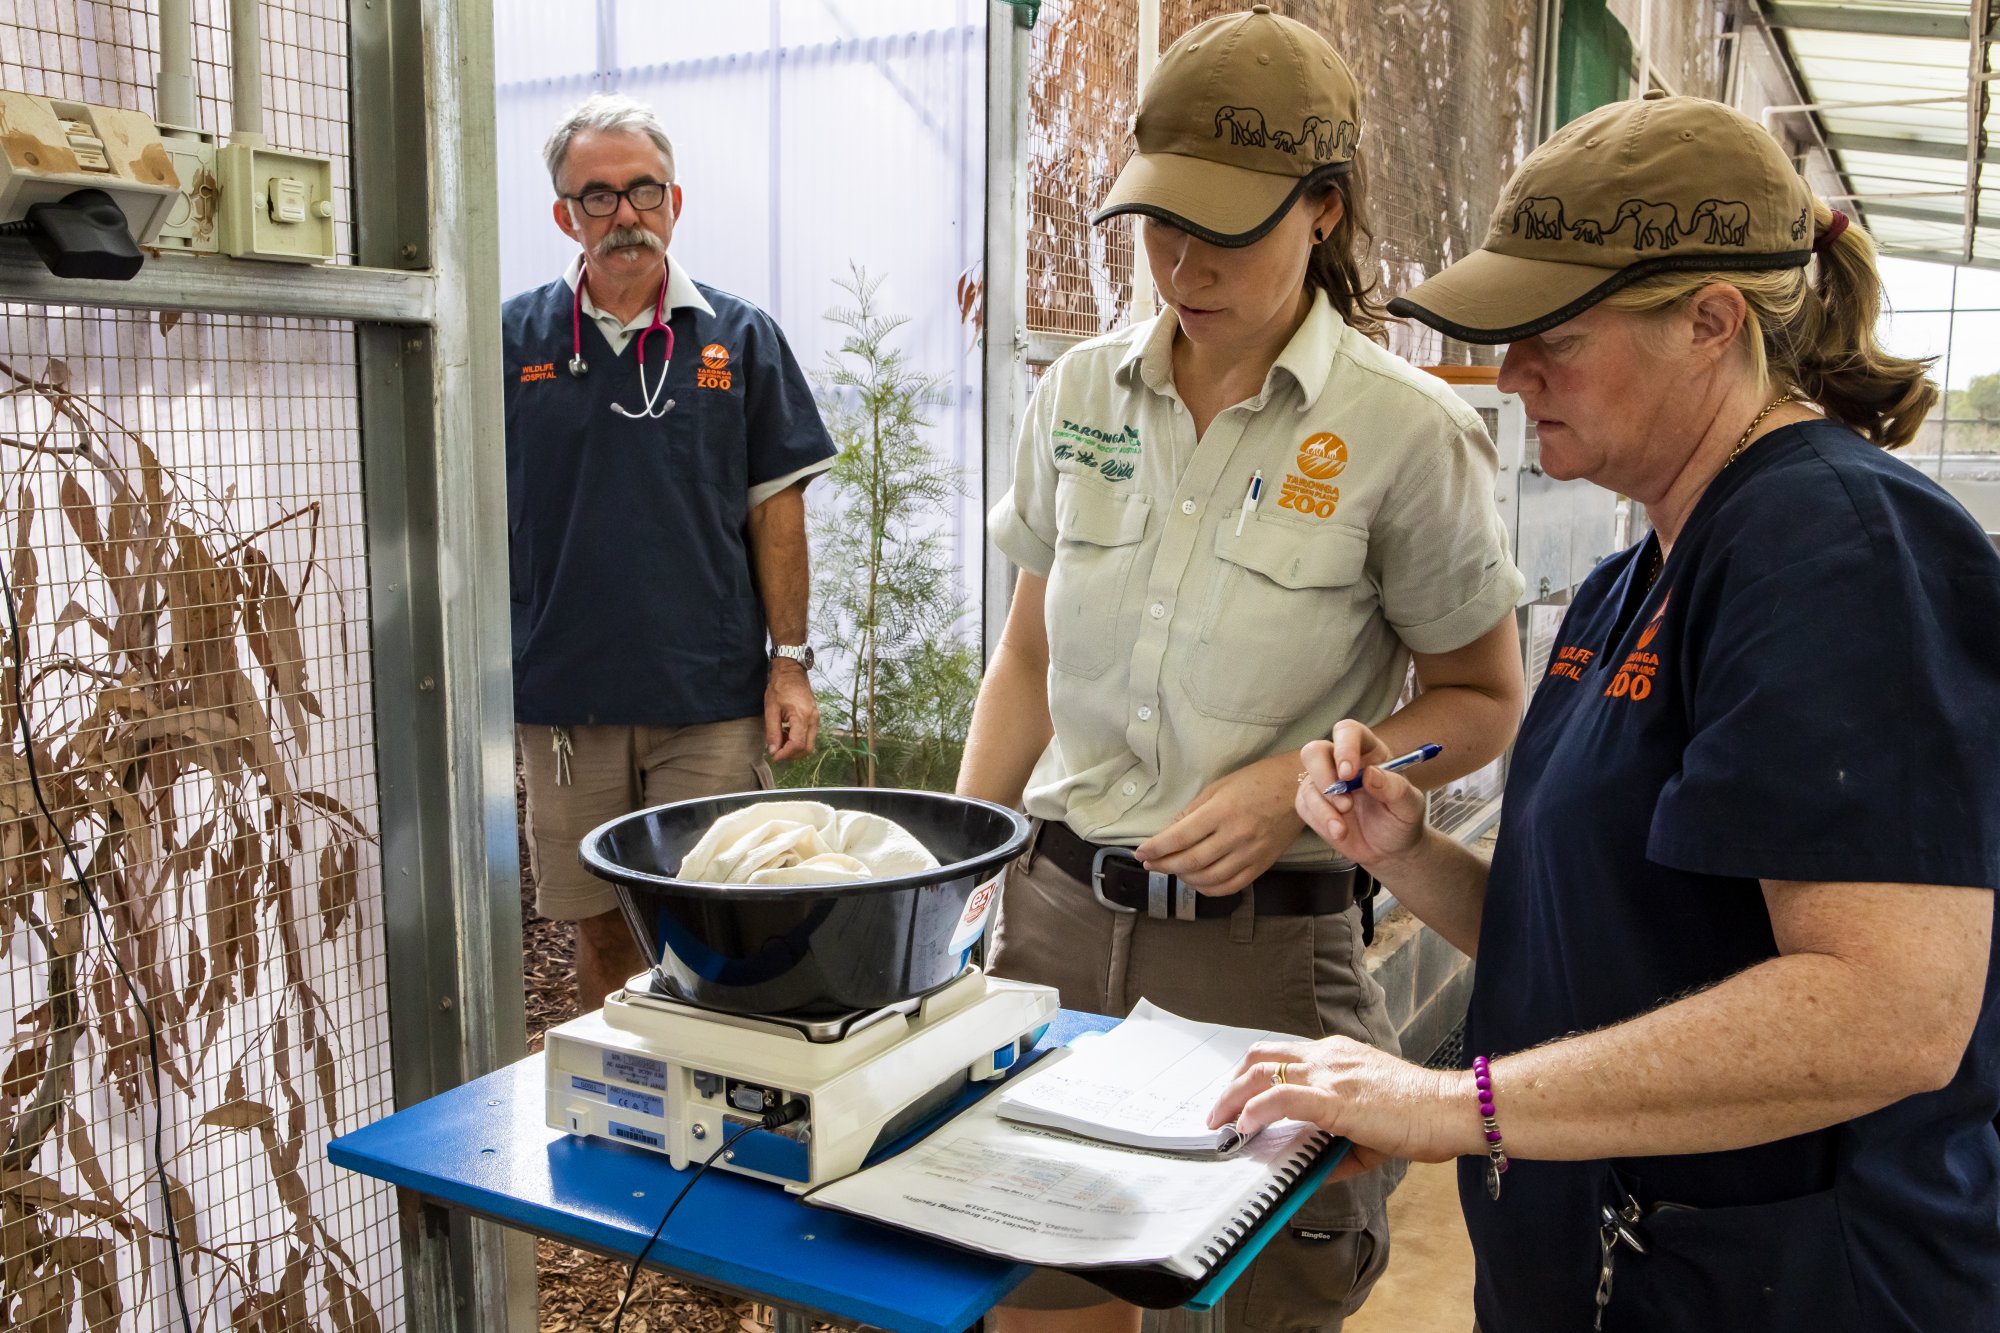 Birds are weighed as part of their health check. Photo: Rick Stevens 